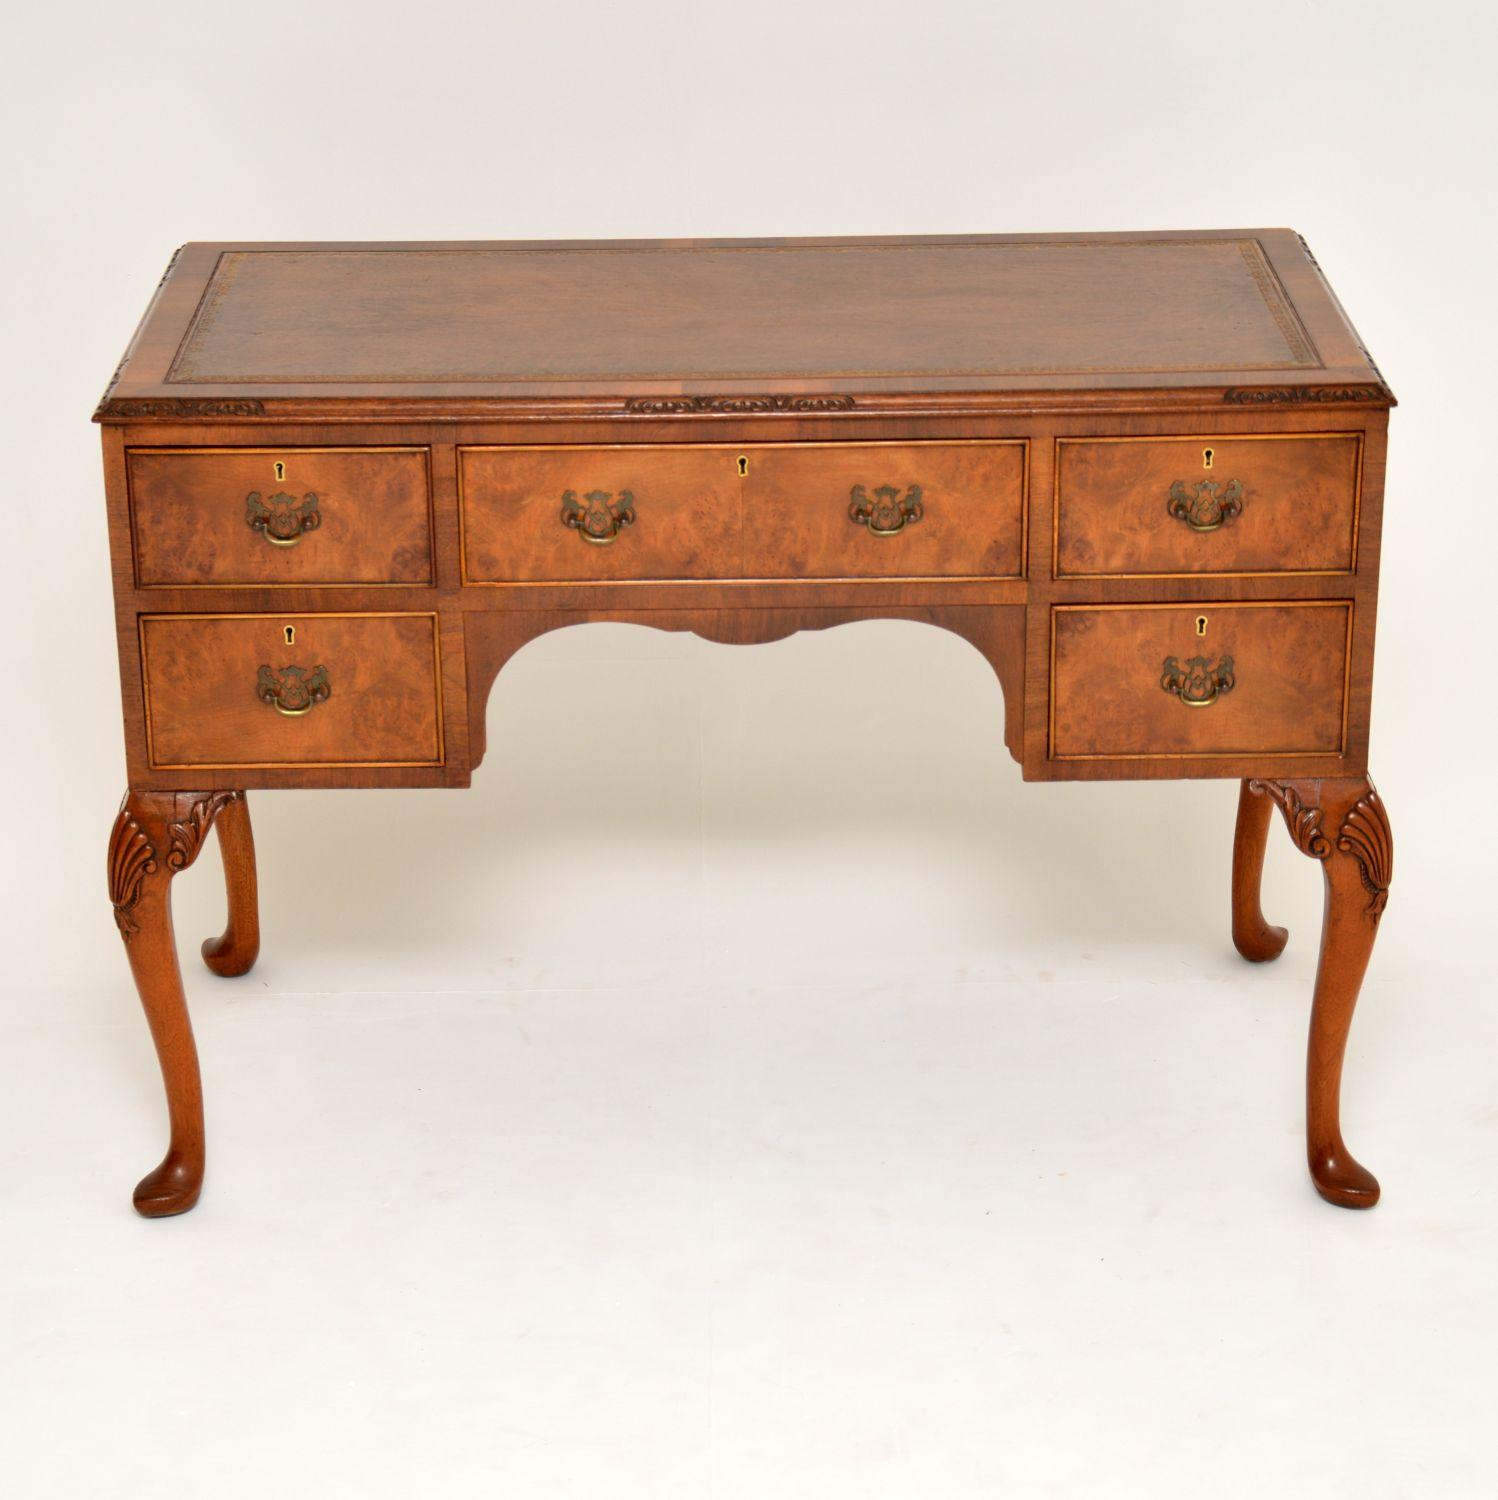 Fine quality antique Queen Anne style walnut leather top desk is excellent condition & dating from circa 1930s period. It has a tooled leather writing surface & a top edge that’s intermittently carved all the way around. The drawer fronts are burr